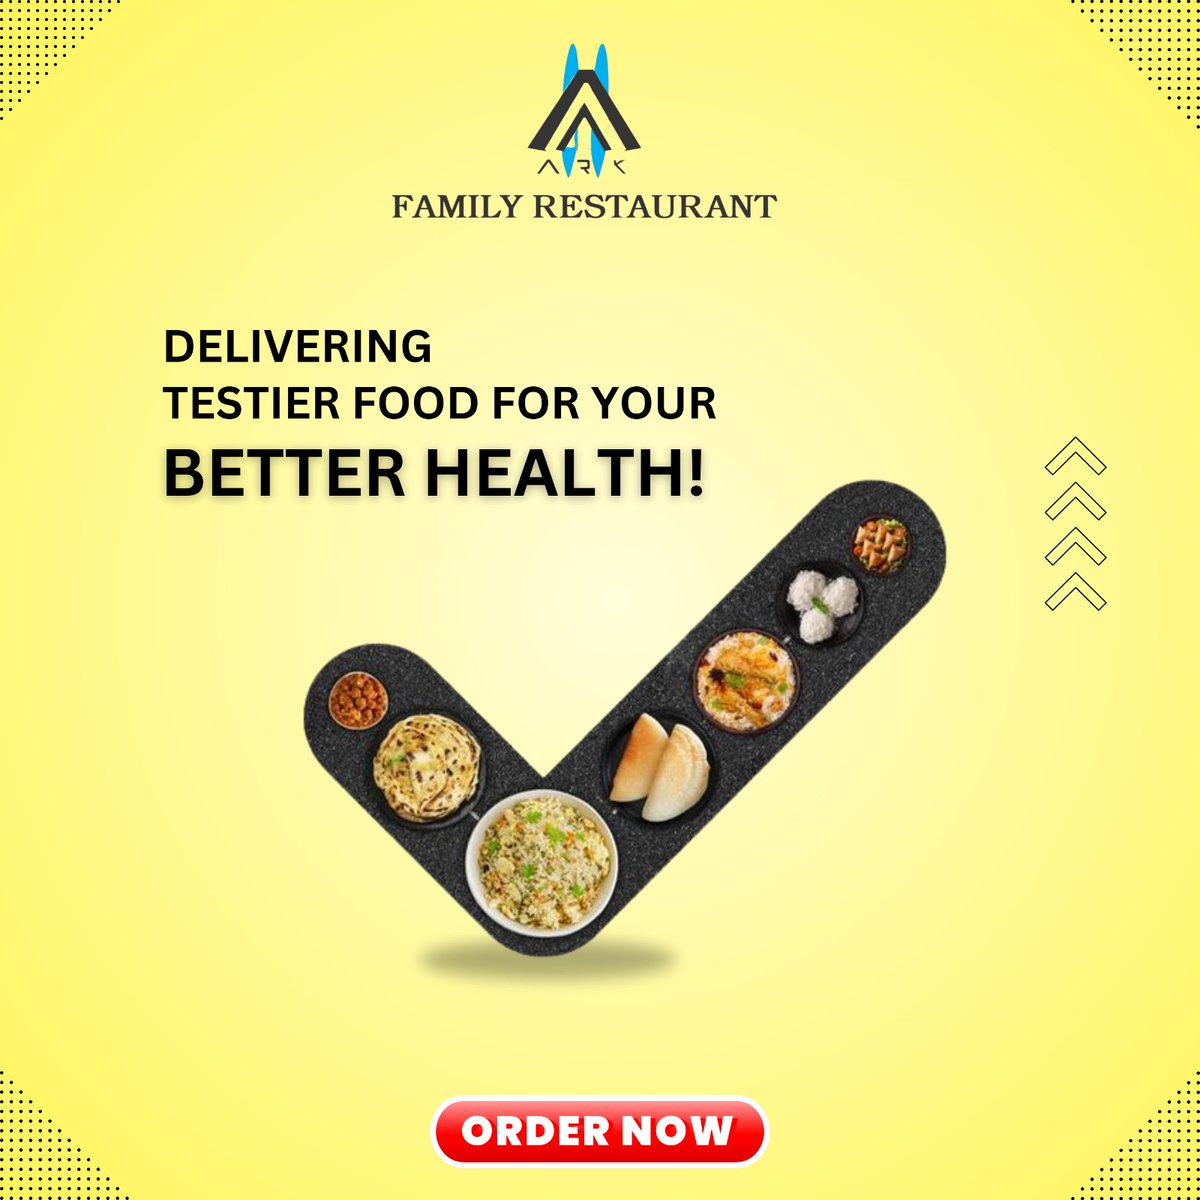 🍲🥗 Delight in the Tastier Side of Health at ARK Family Restaurant! 🏠

🌟 Indulge in wholesome and flavorful food without compromising on taste! 

#ARKFamilyRestaurant #HealthierChoices #NutritiousDelights #FarmToTable #DeliciouslyHealthy #WholesomeEating #TastyYetHealthy